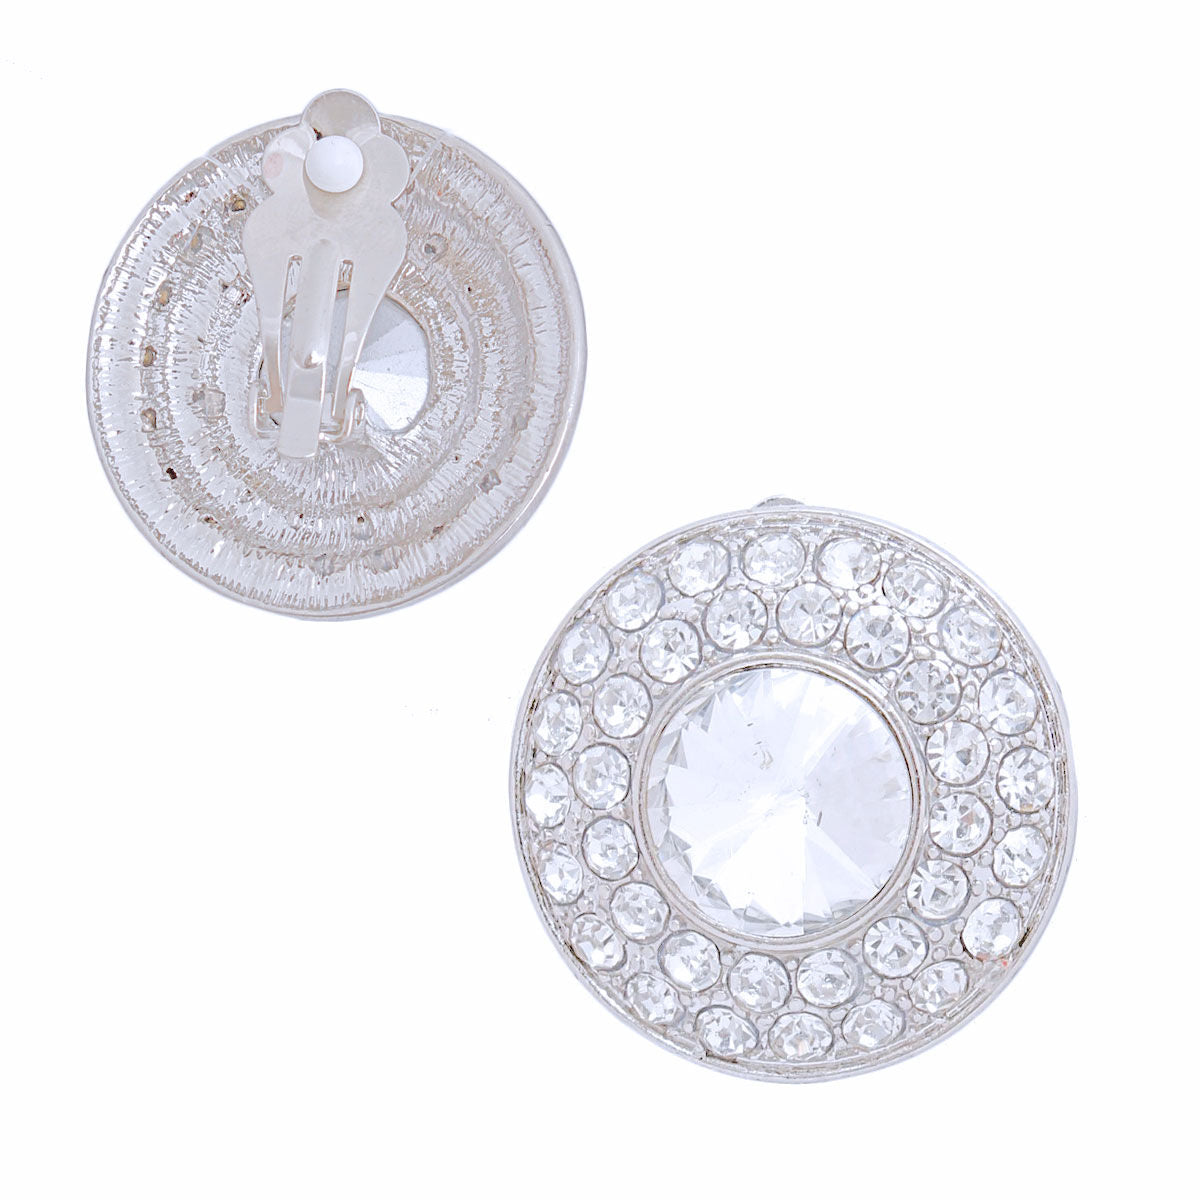 Clip On Small Silver Dome Earrings for Women